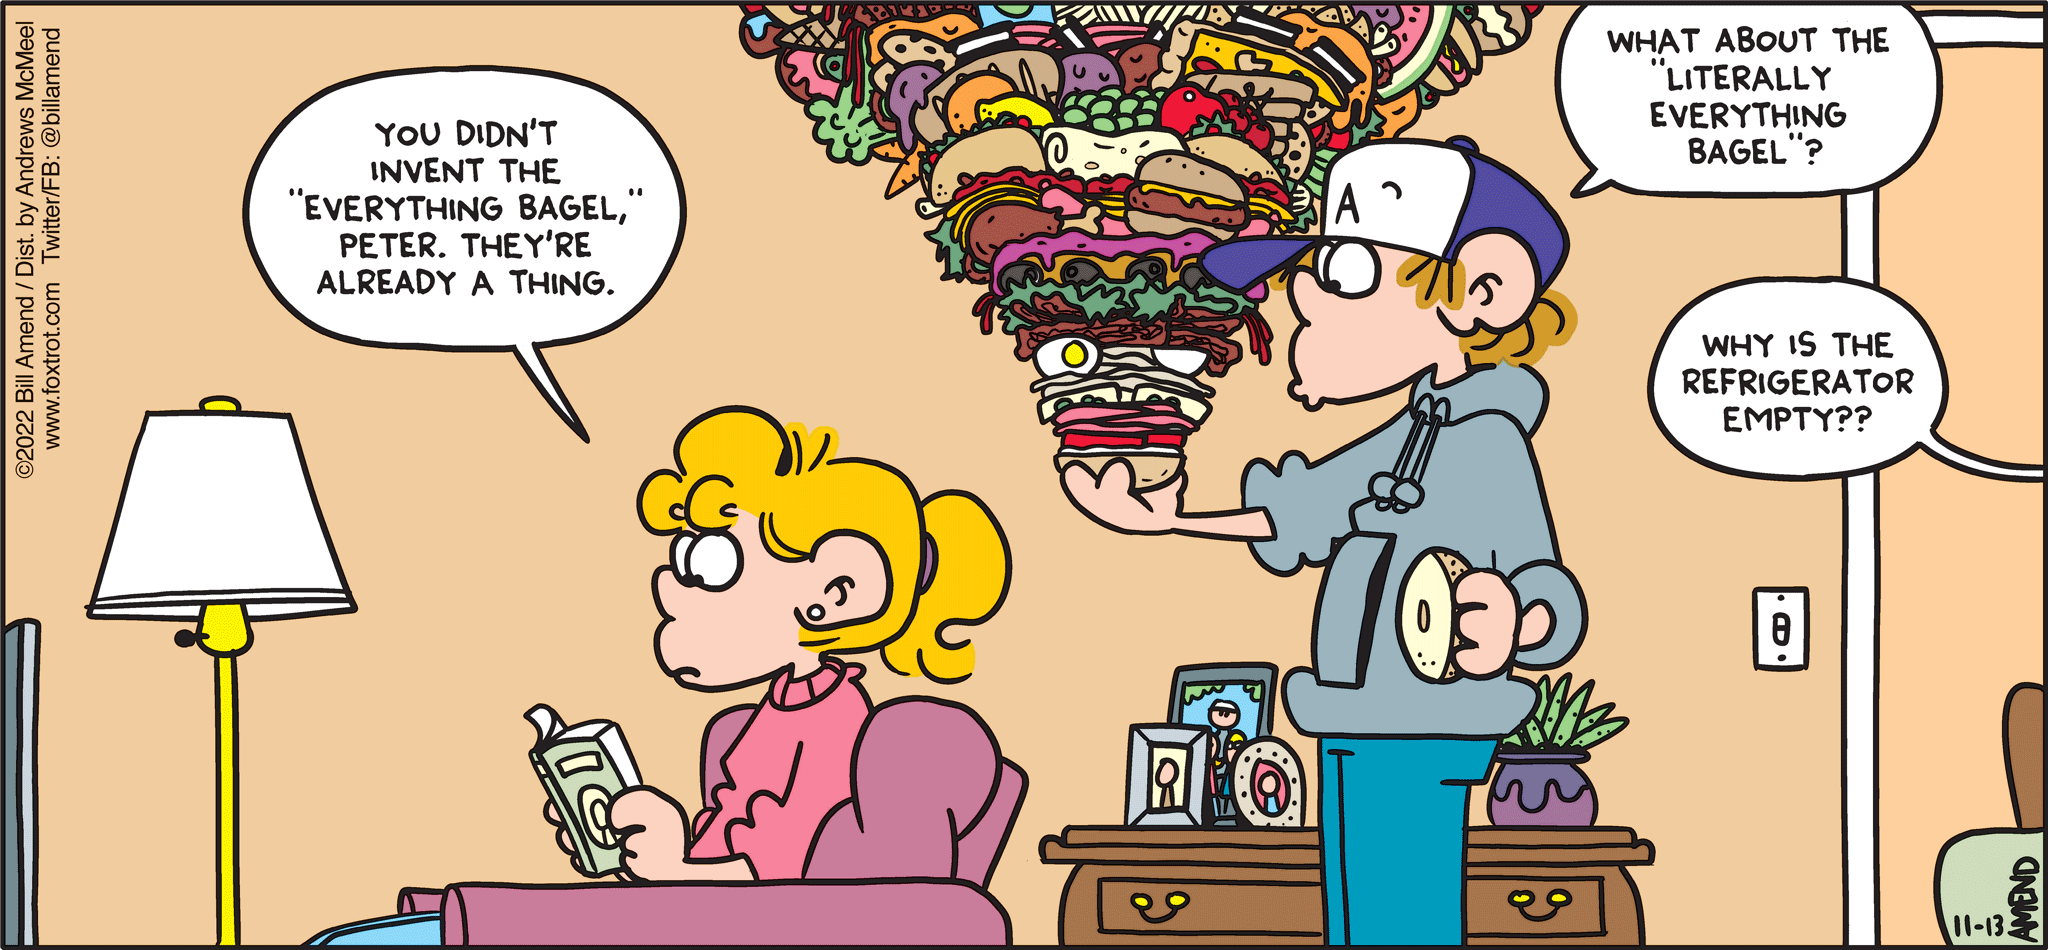 FoxTrot comic strip by Bill Amend - "Literally Everything" published November 13, 2022 - Transcript: Paige Fox: You didn't invent the "everything bagel," Peter. They're already a thing. Peter Fox: What about the "Literally Everything Bagel"? Voice from kitchen: Why is the refrigerator empty?